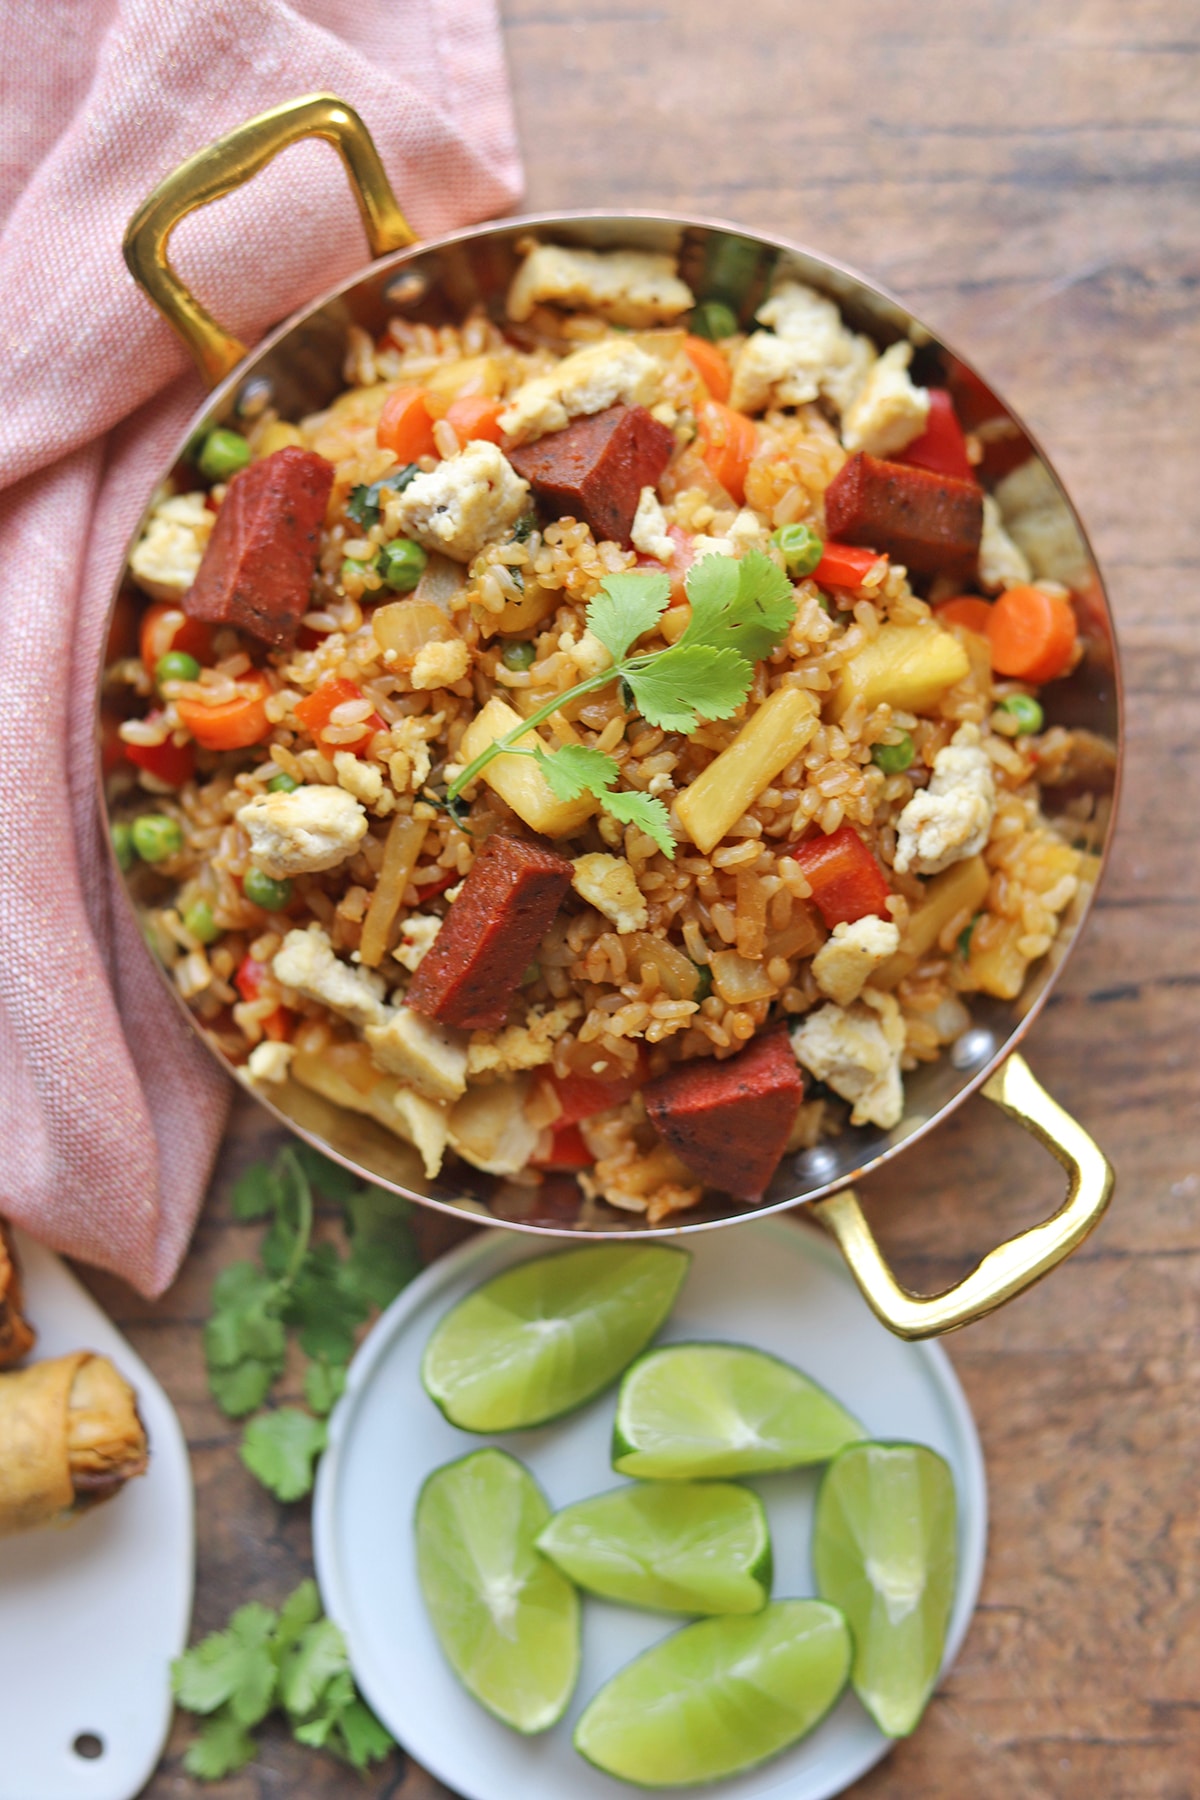 Overhead skillet with pineapple fried rice and seitan ham.